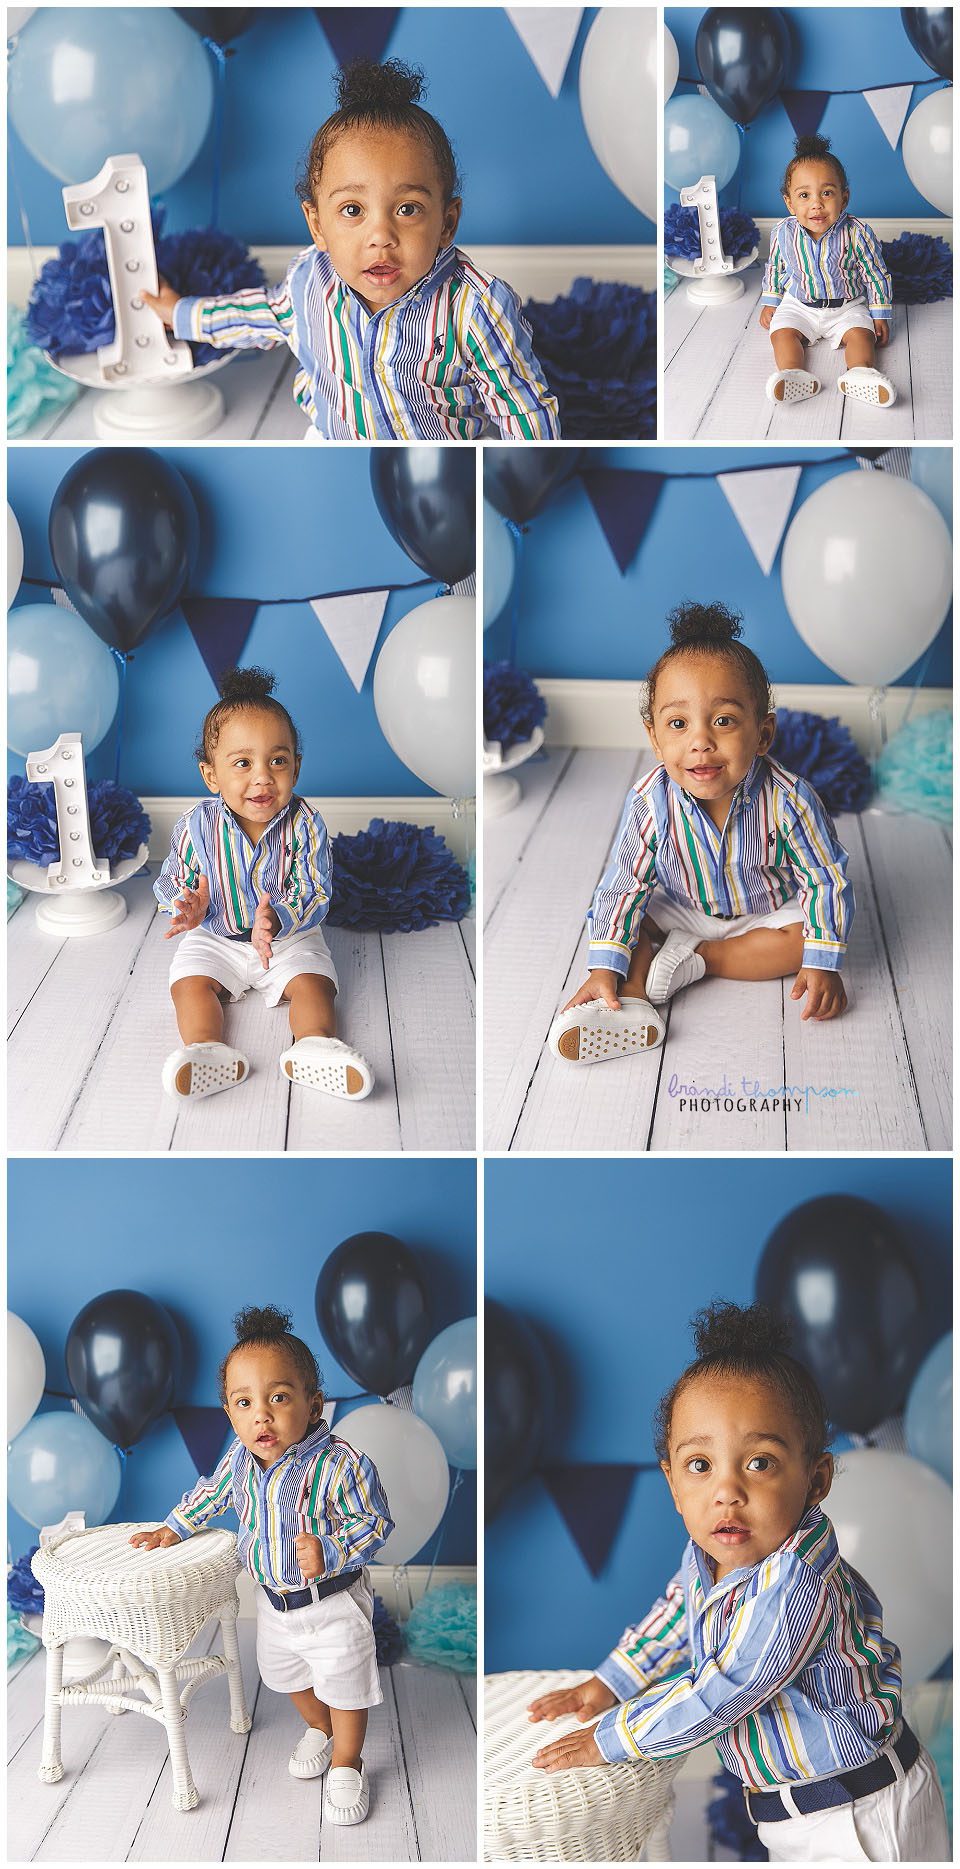 One year old Black baby boy in blue striped shirt, white shorts, with a blue and white birthday background, plano tx